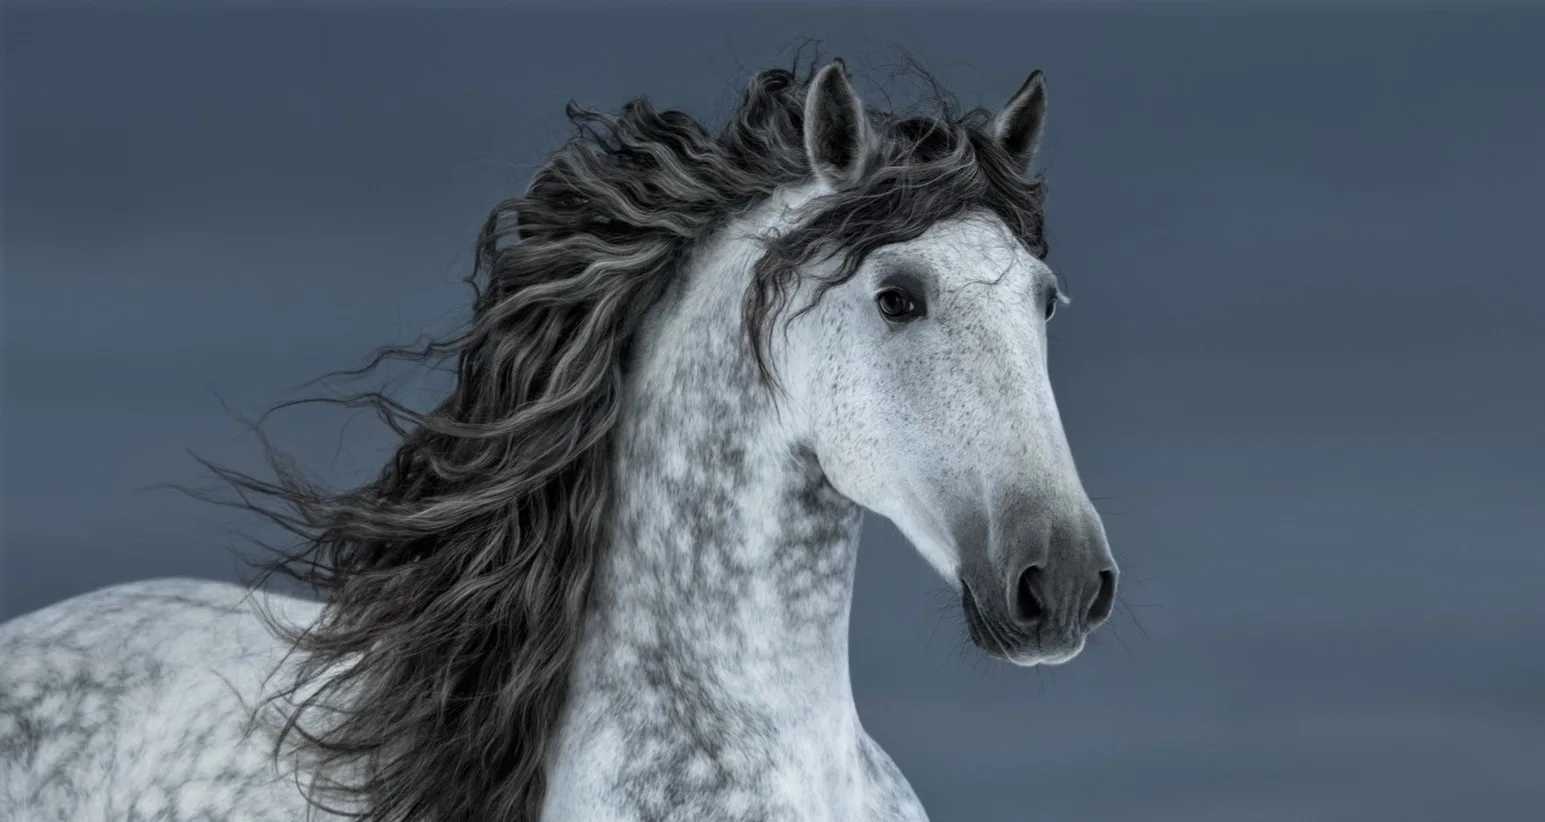 10 Facts You Didn’t Know About Andalusian Horses